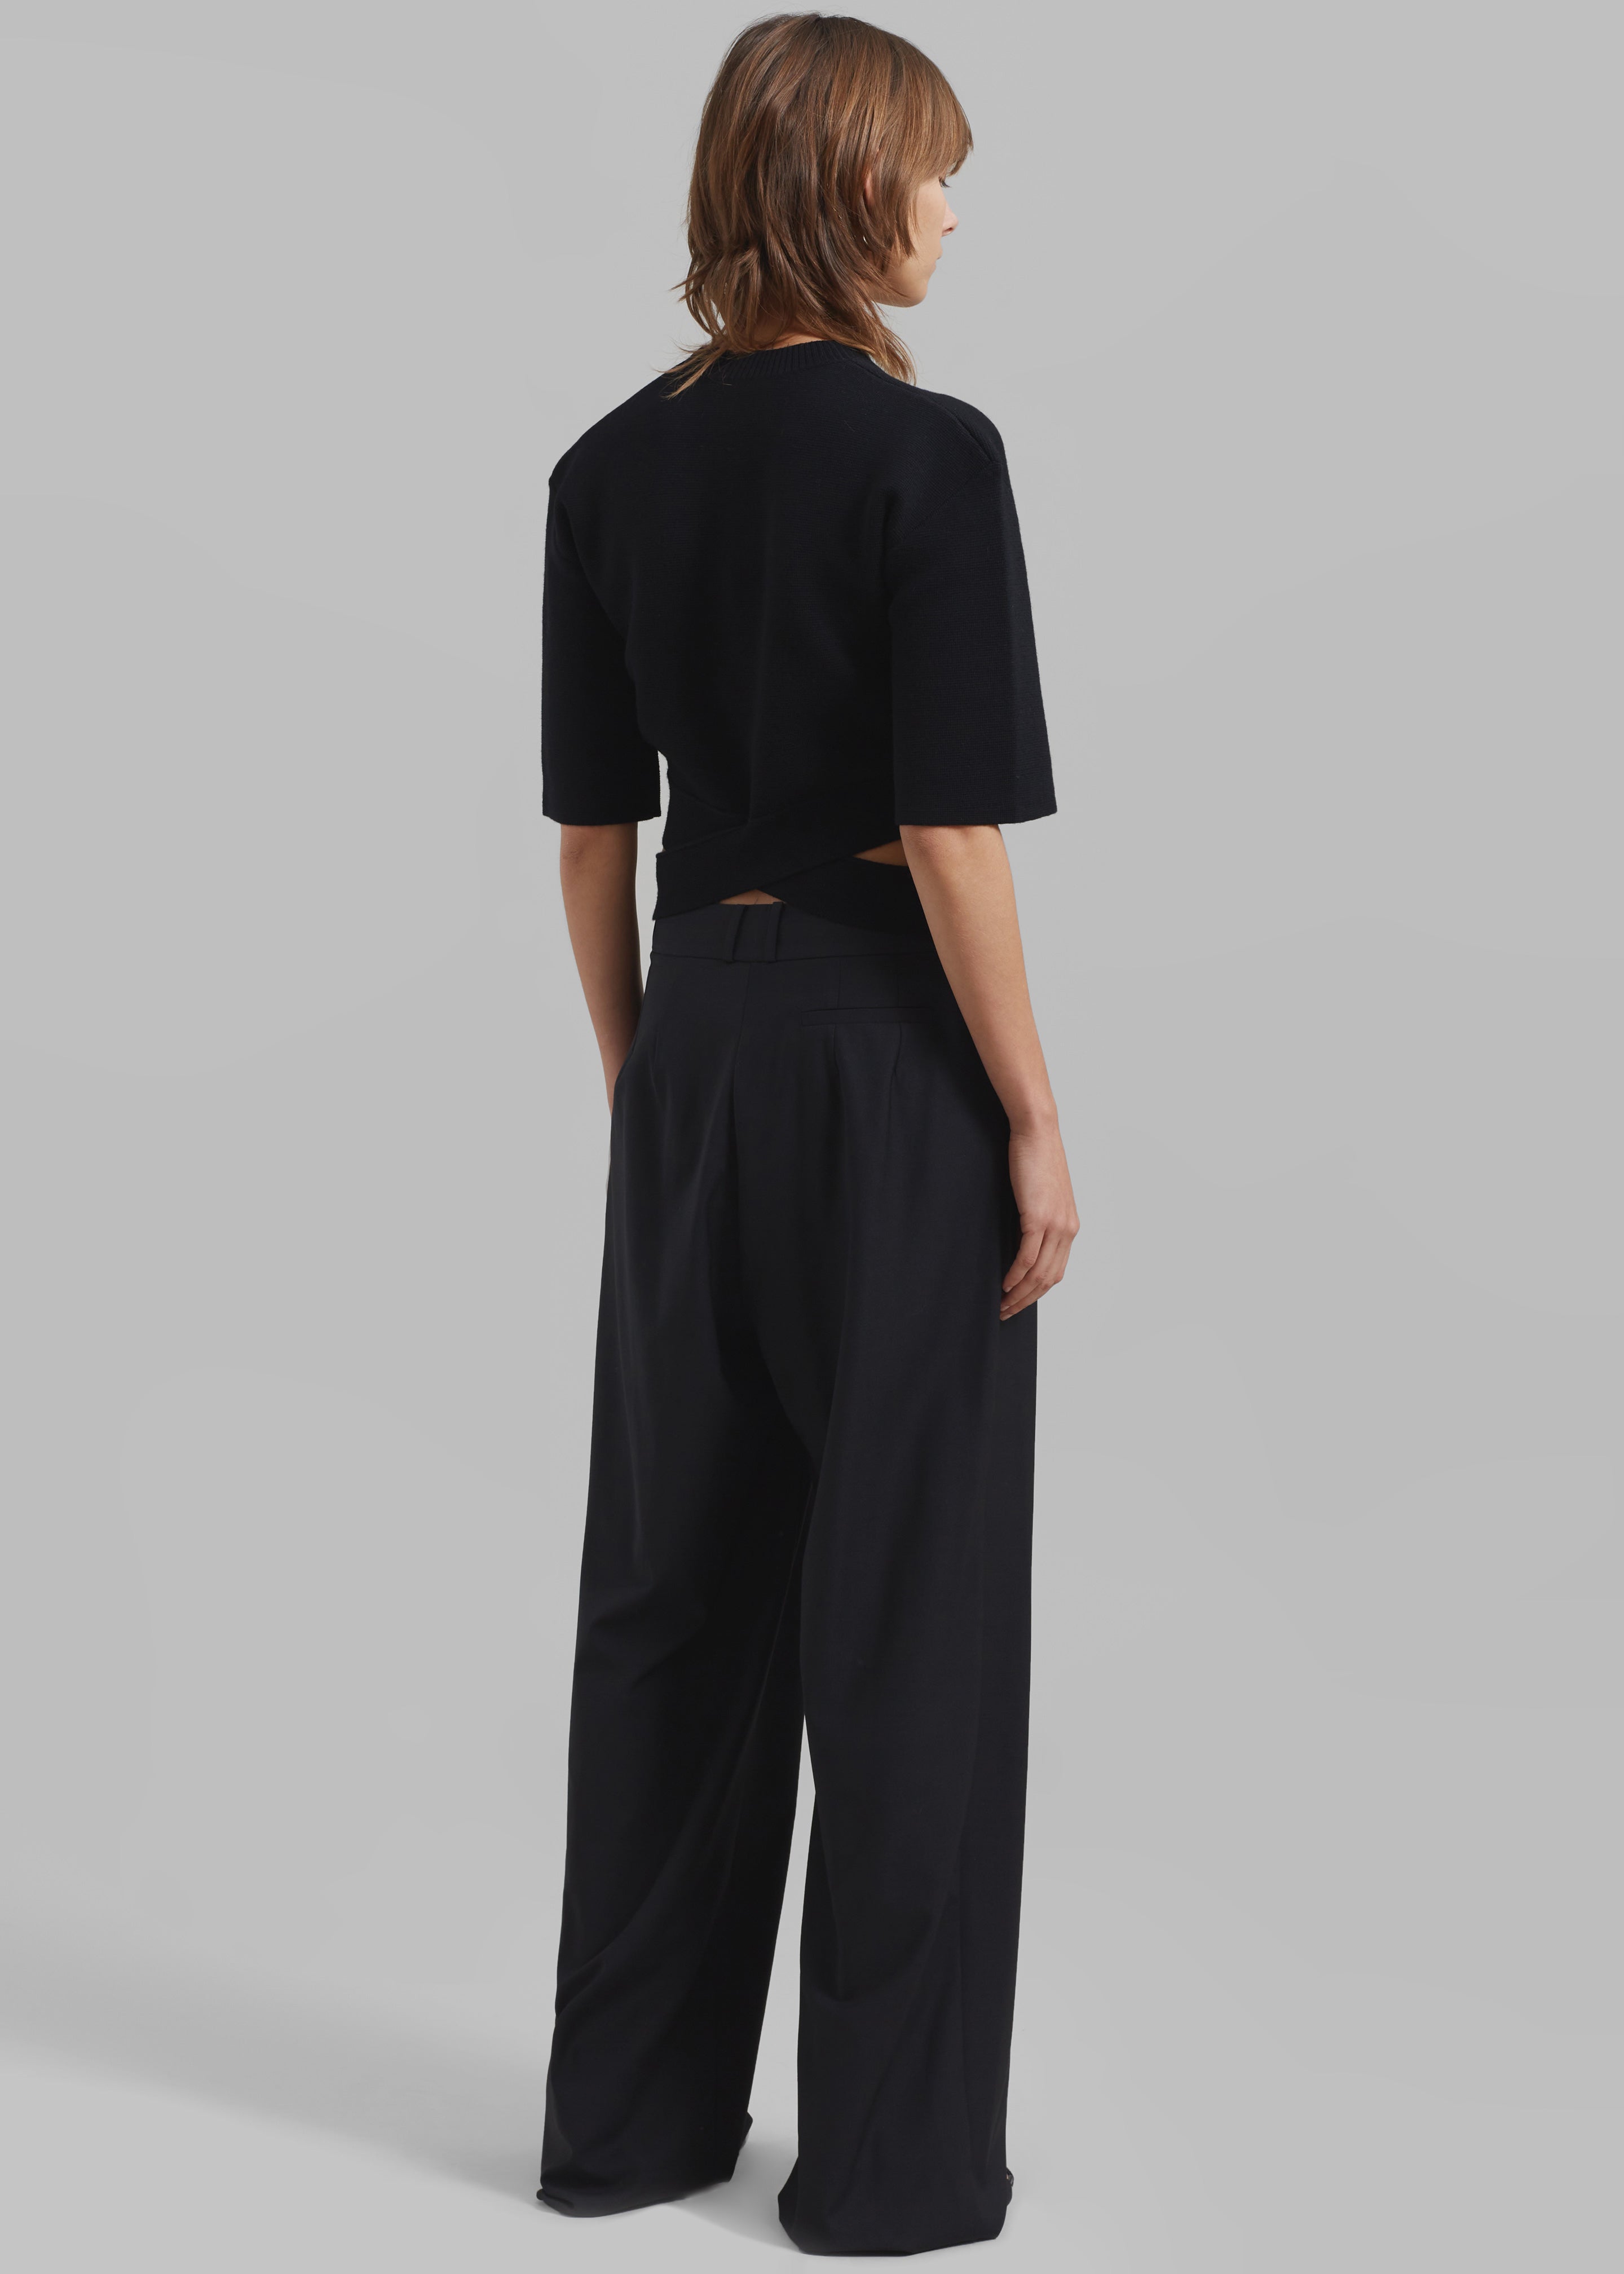 Ripley Pleated Trousers - Black - 8